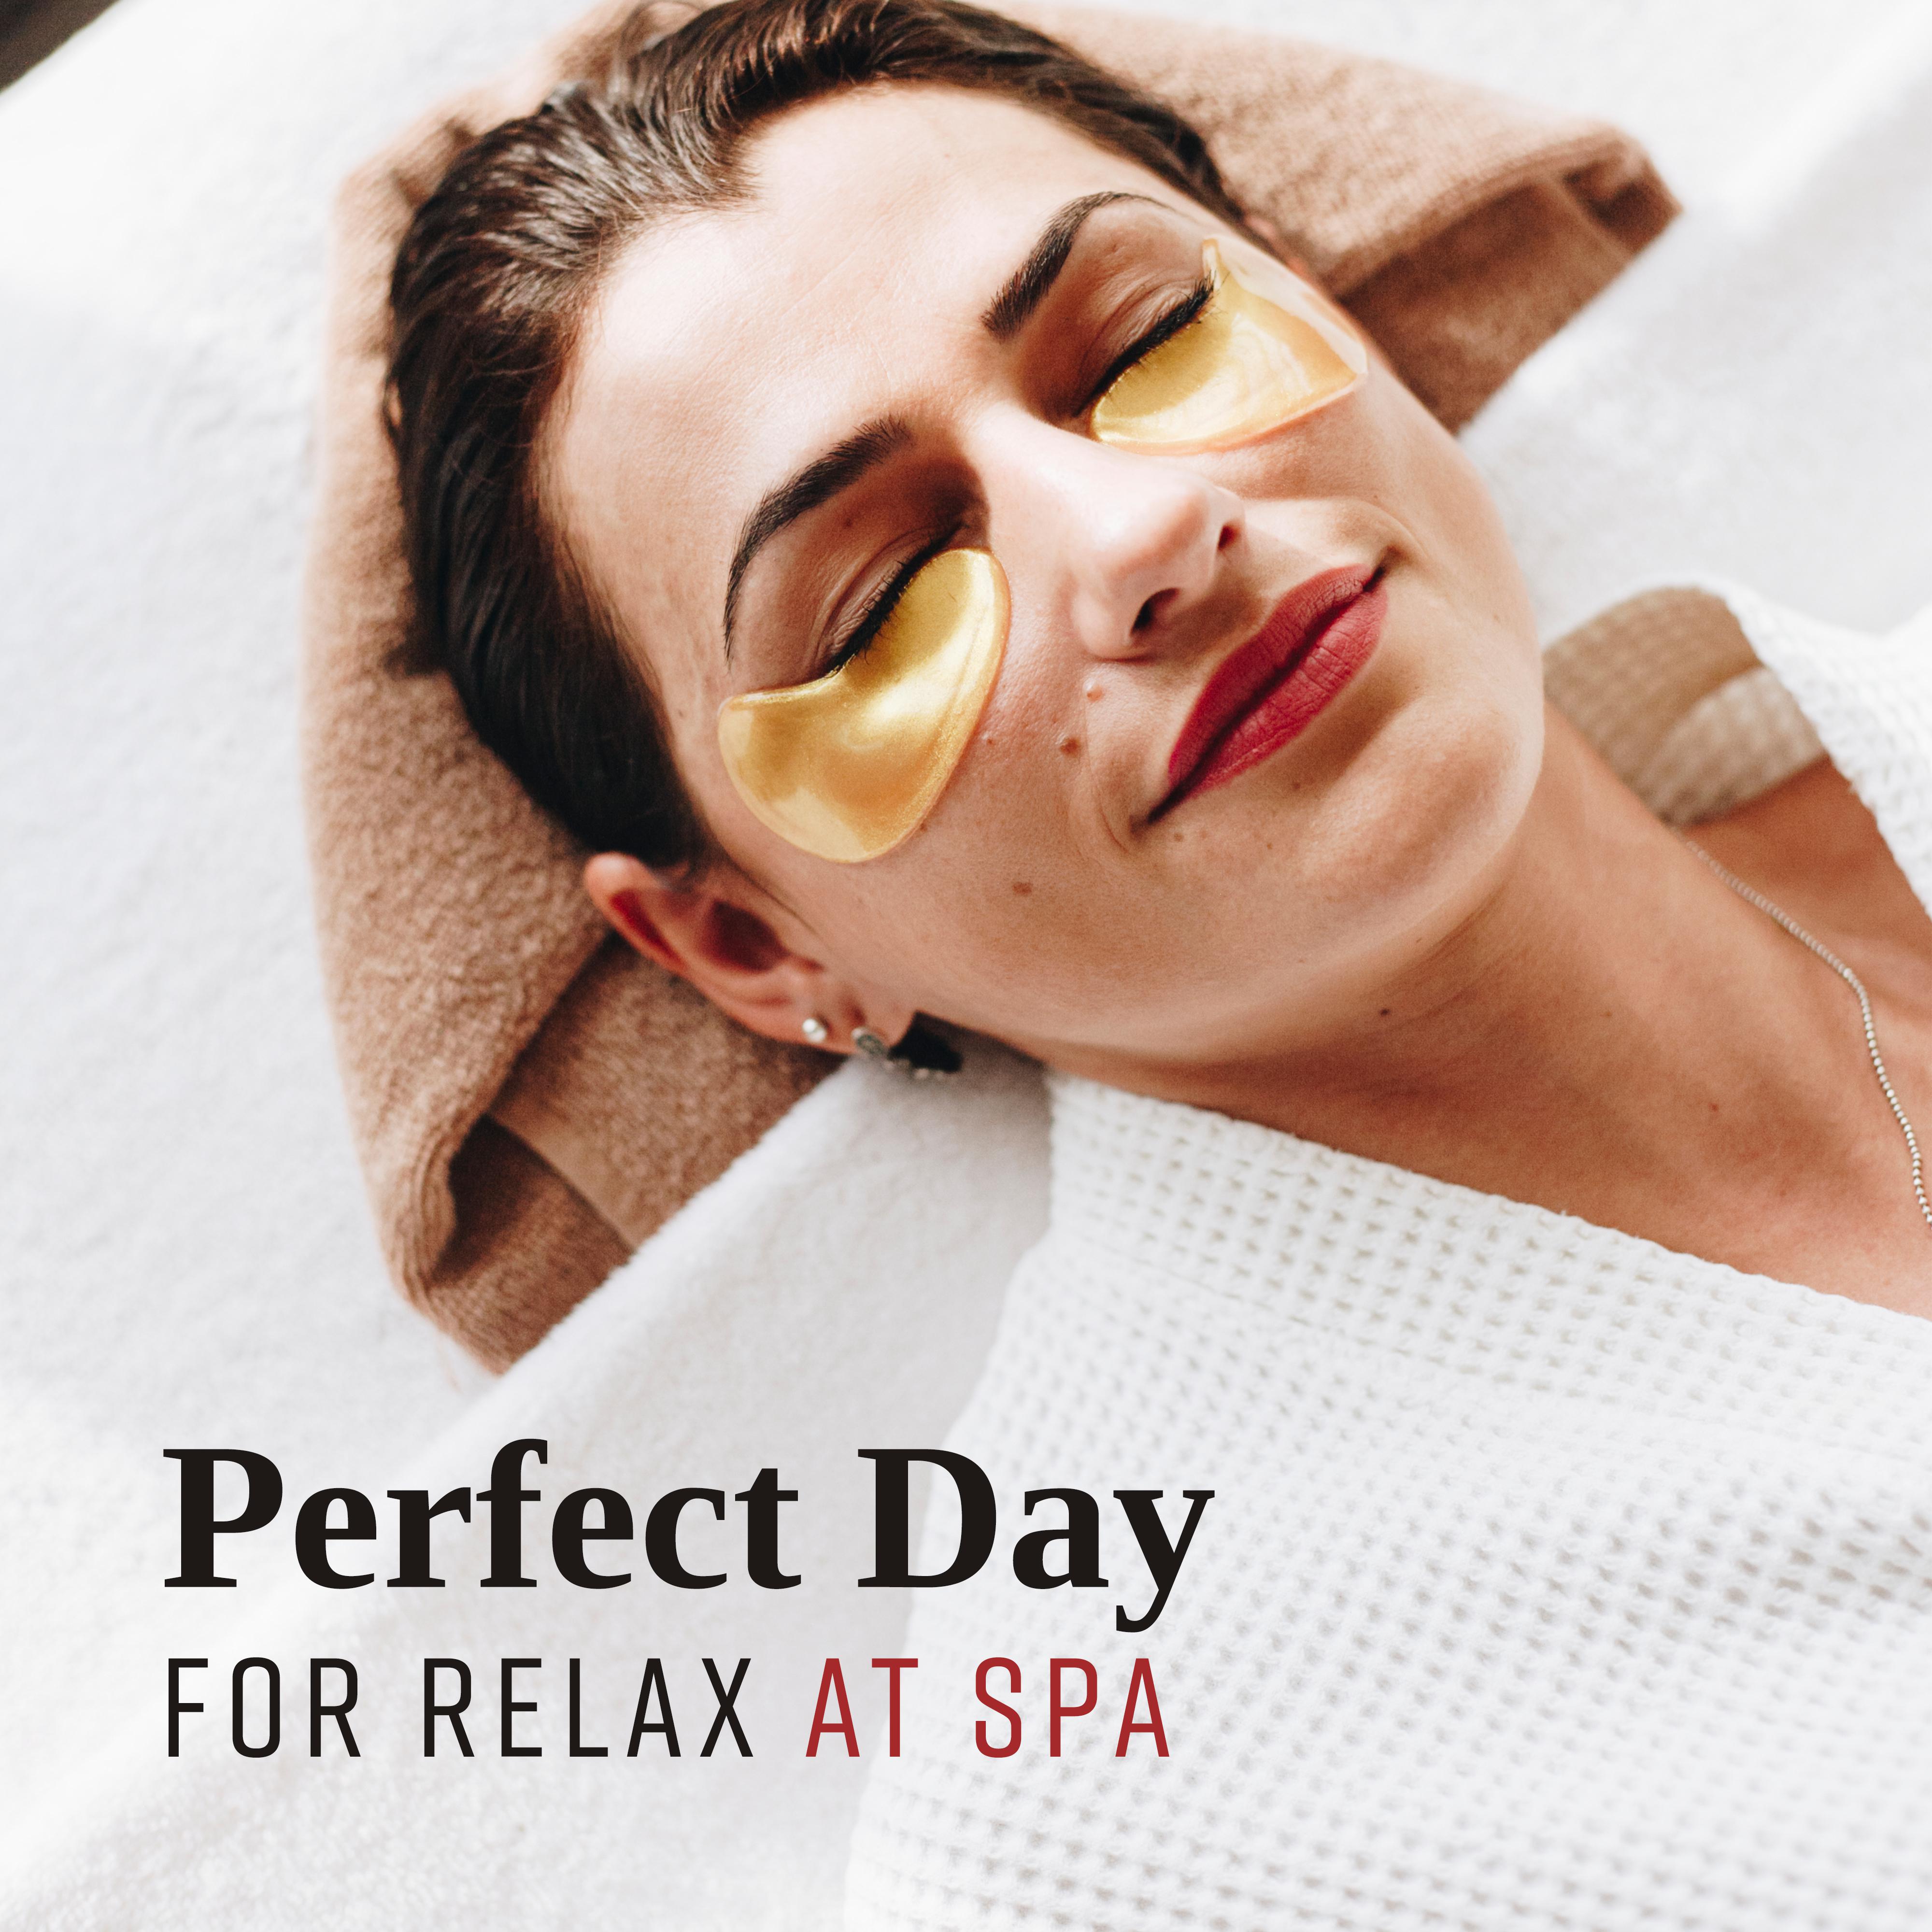 Perfect Day for Relax at Spa: 15 Soothing Songs for Total Relaxation at Spa, Wellness, Massage & Sauna Background Music